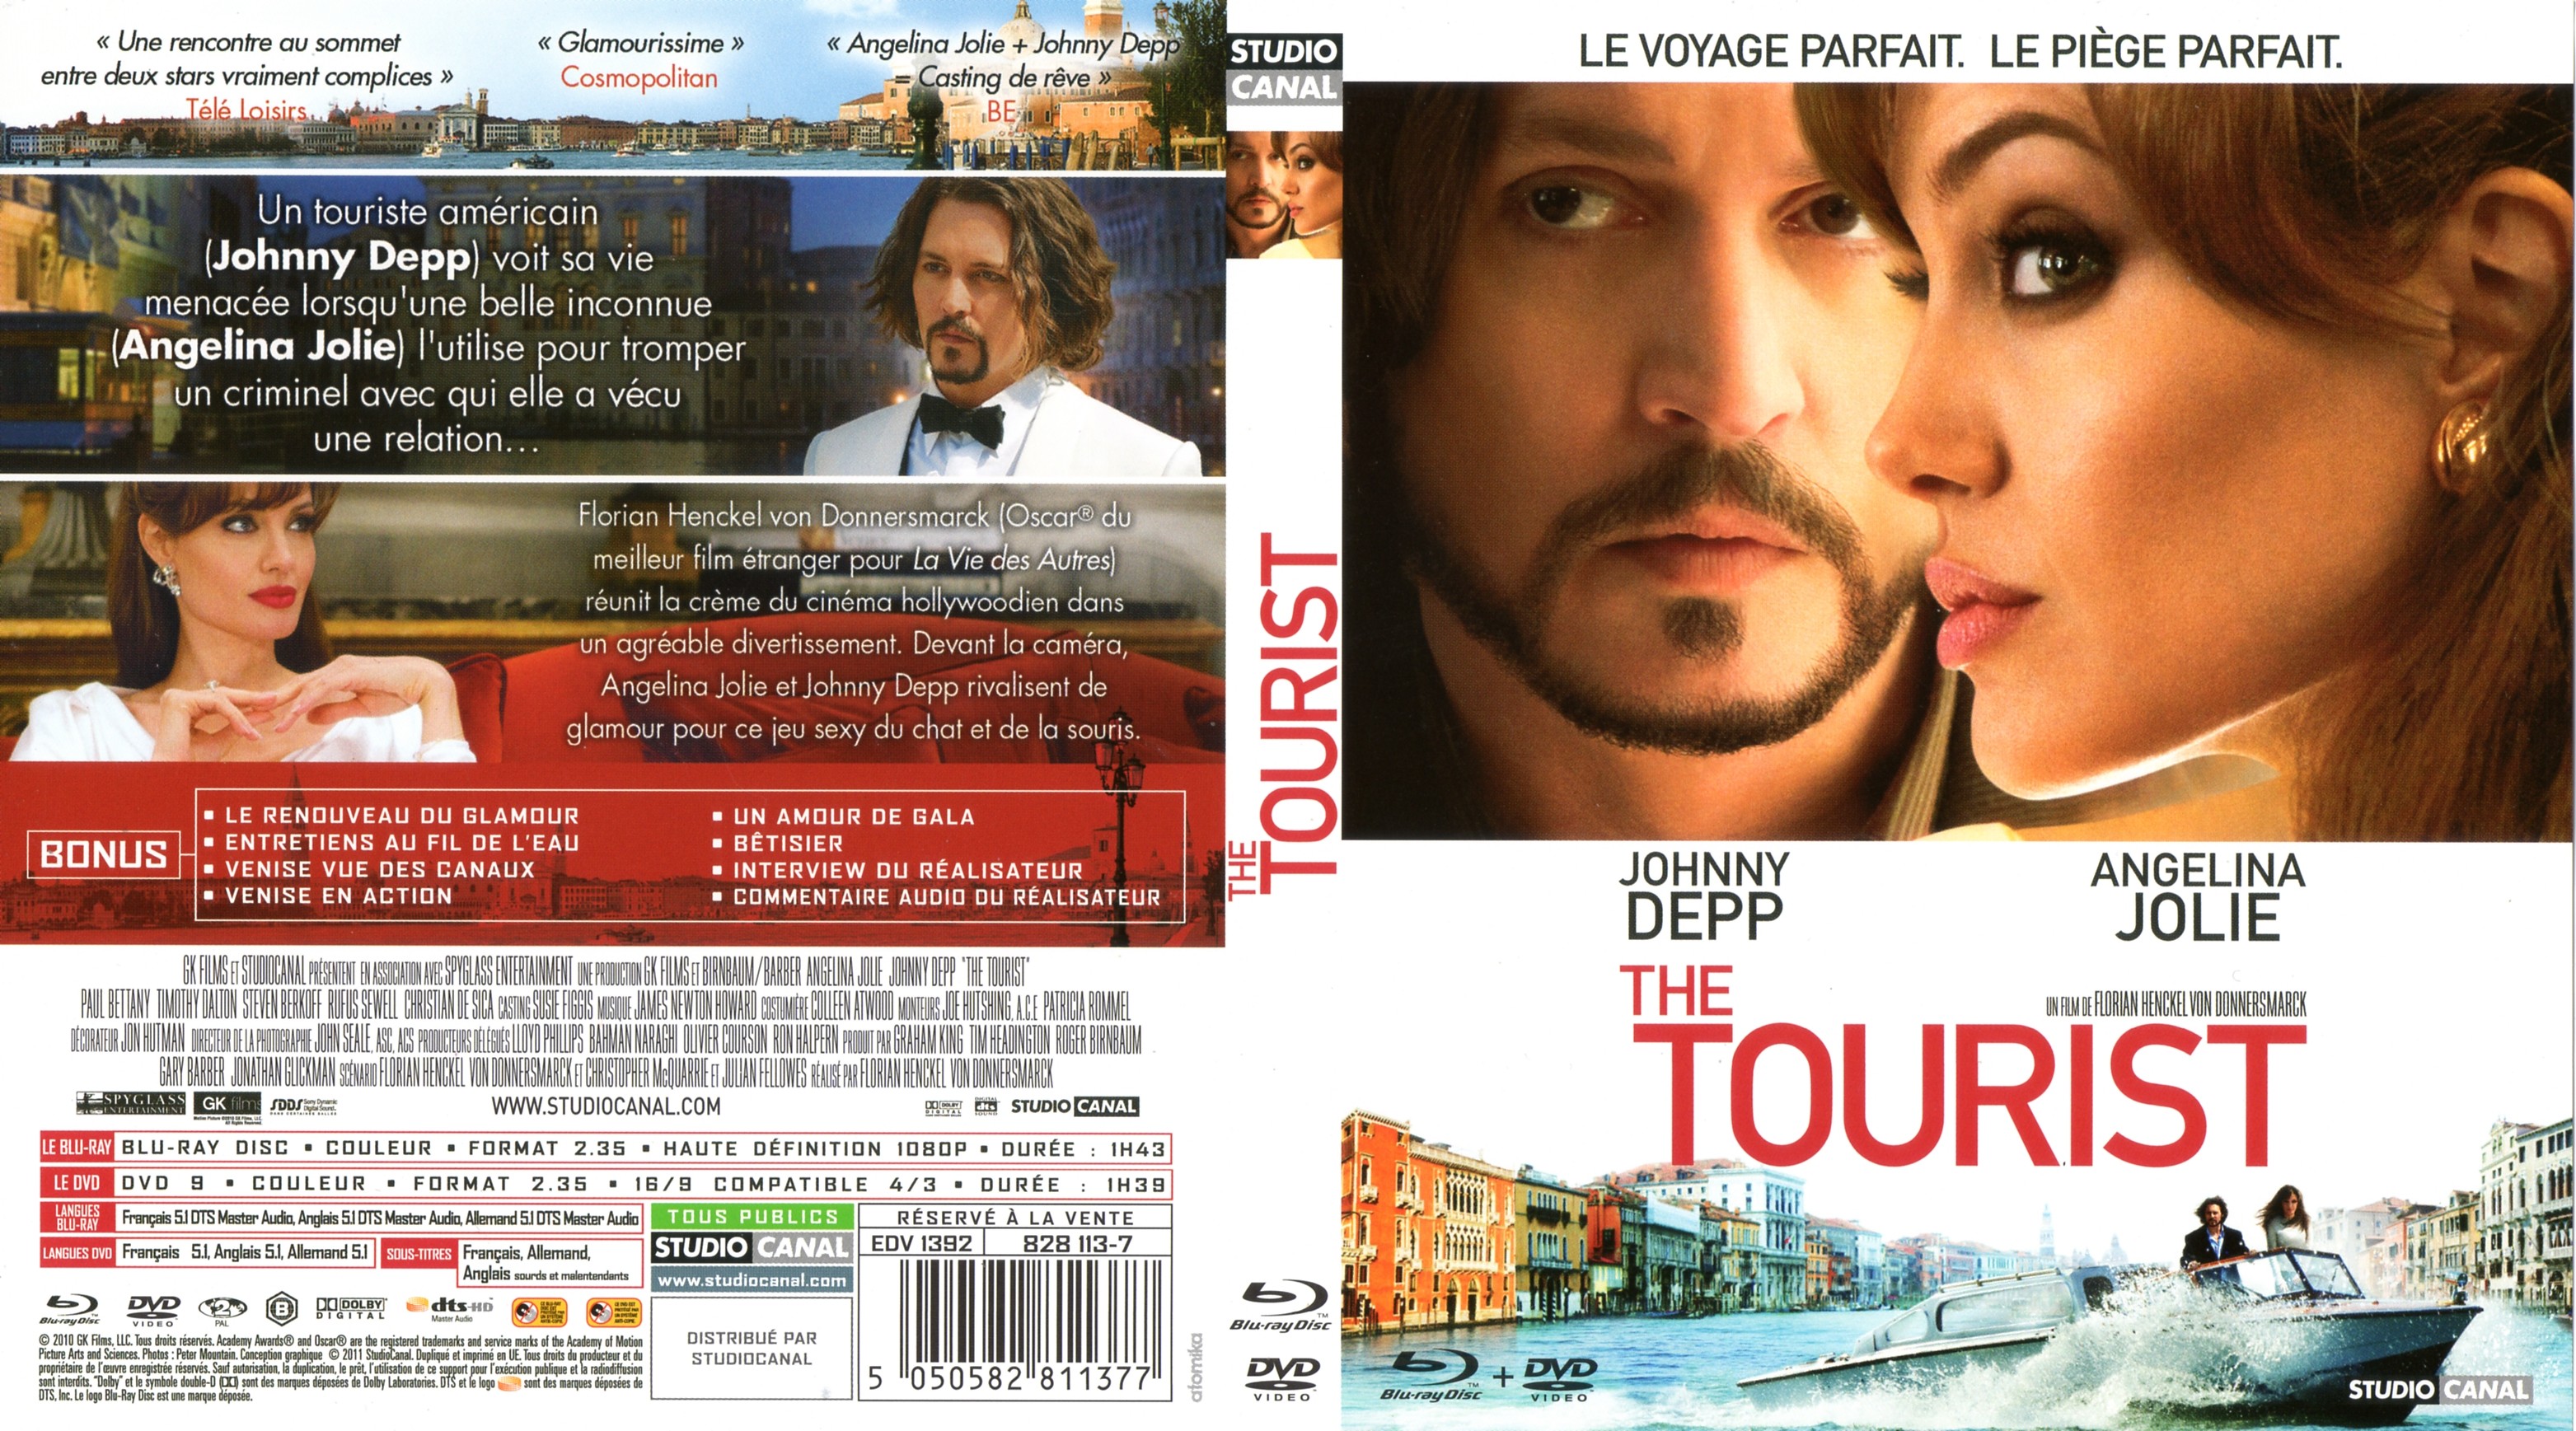 Jaquette DVD The tourist (BLU-RAY)